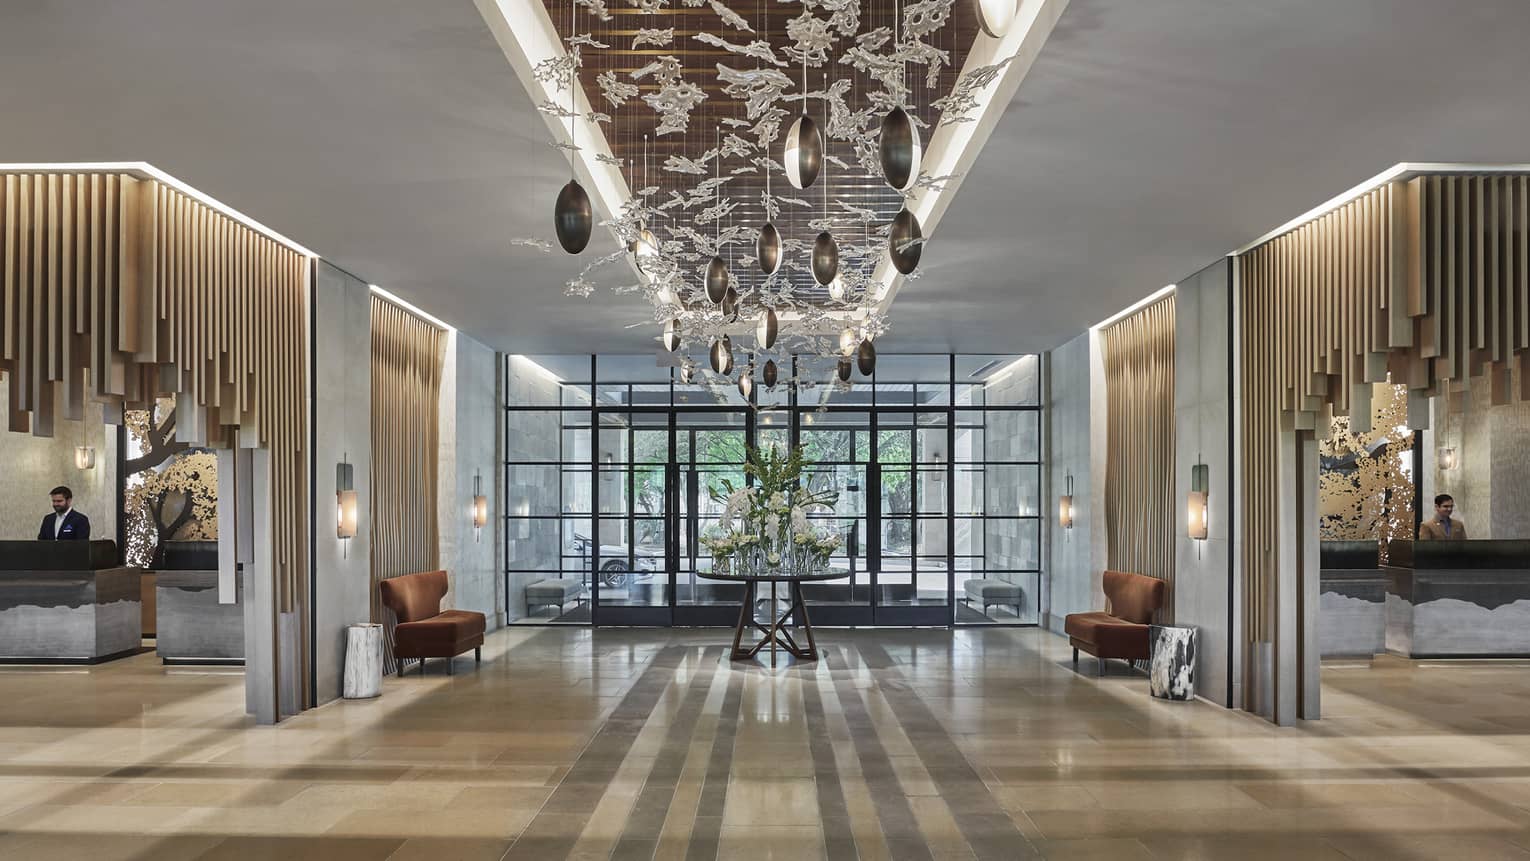 Delicate glass and rounded lights adorn the ceiling of a well-lit lobby